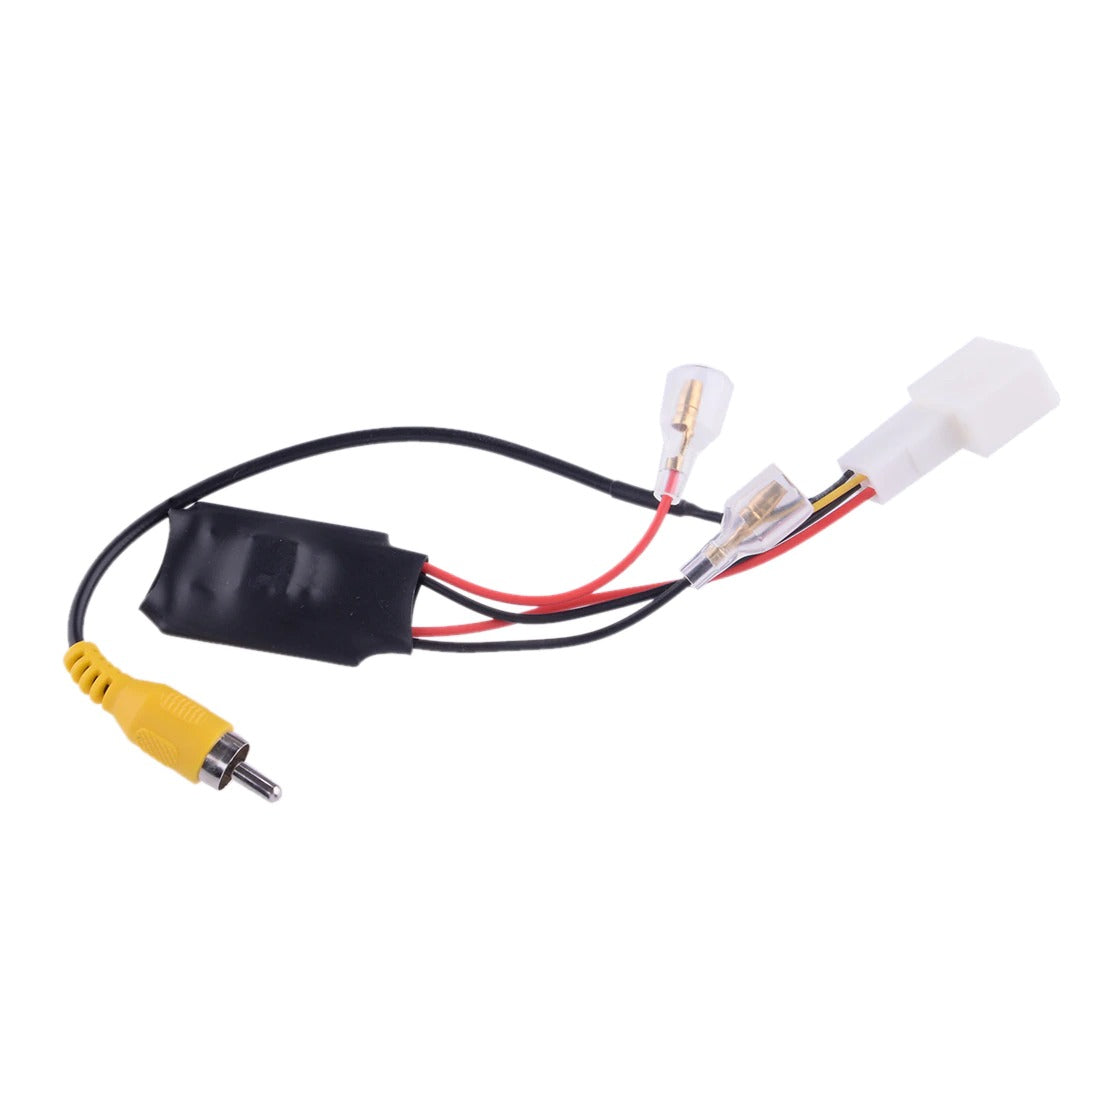 Car 4 Pin Reverse Camera Retention Wiring Harness Cable Plug Adapter Connector Accessories Fit For Toyota